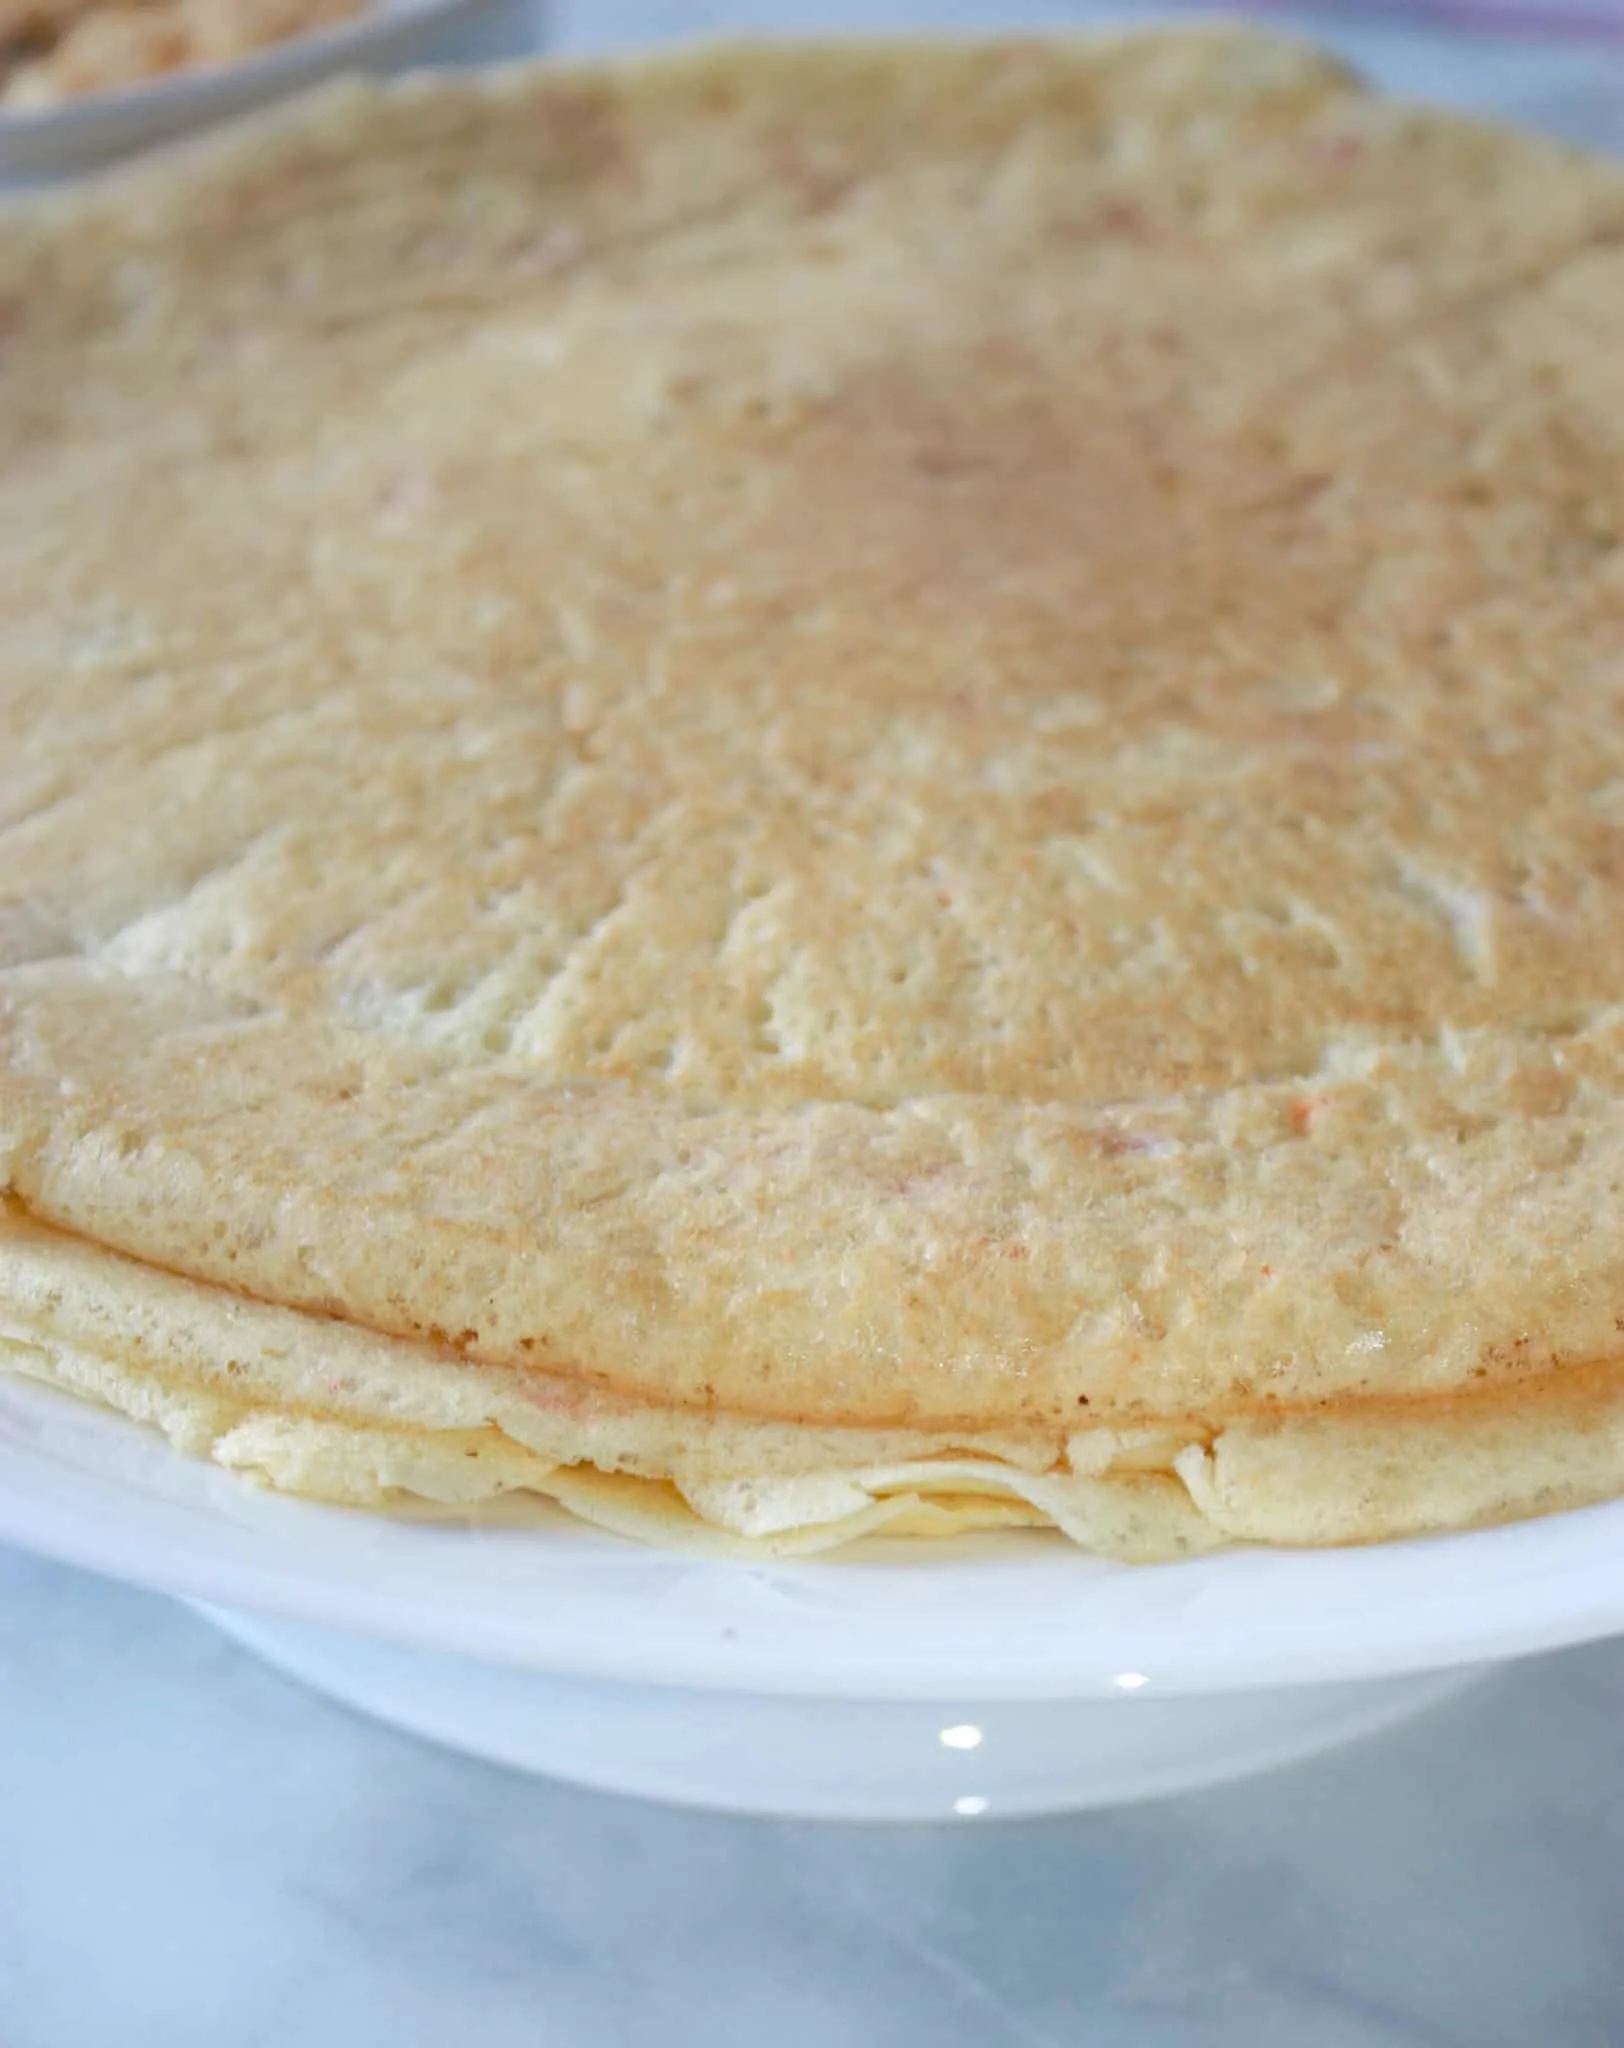 Gluten Free Savoury Crepes are a tasty alternative to using bread. The combination of your imagination and these soft crepes can lead to many delicious options and presentations!